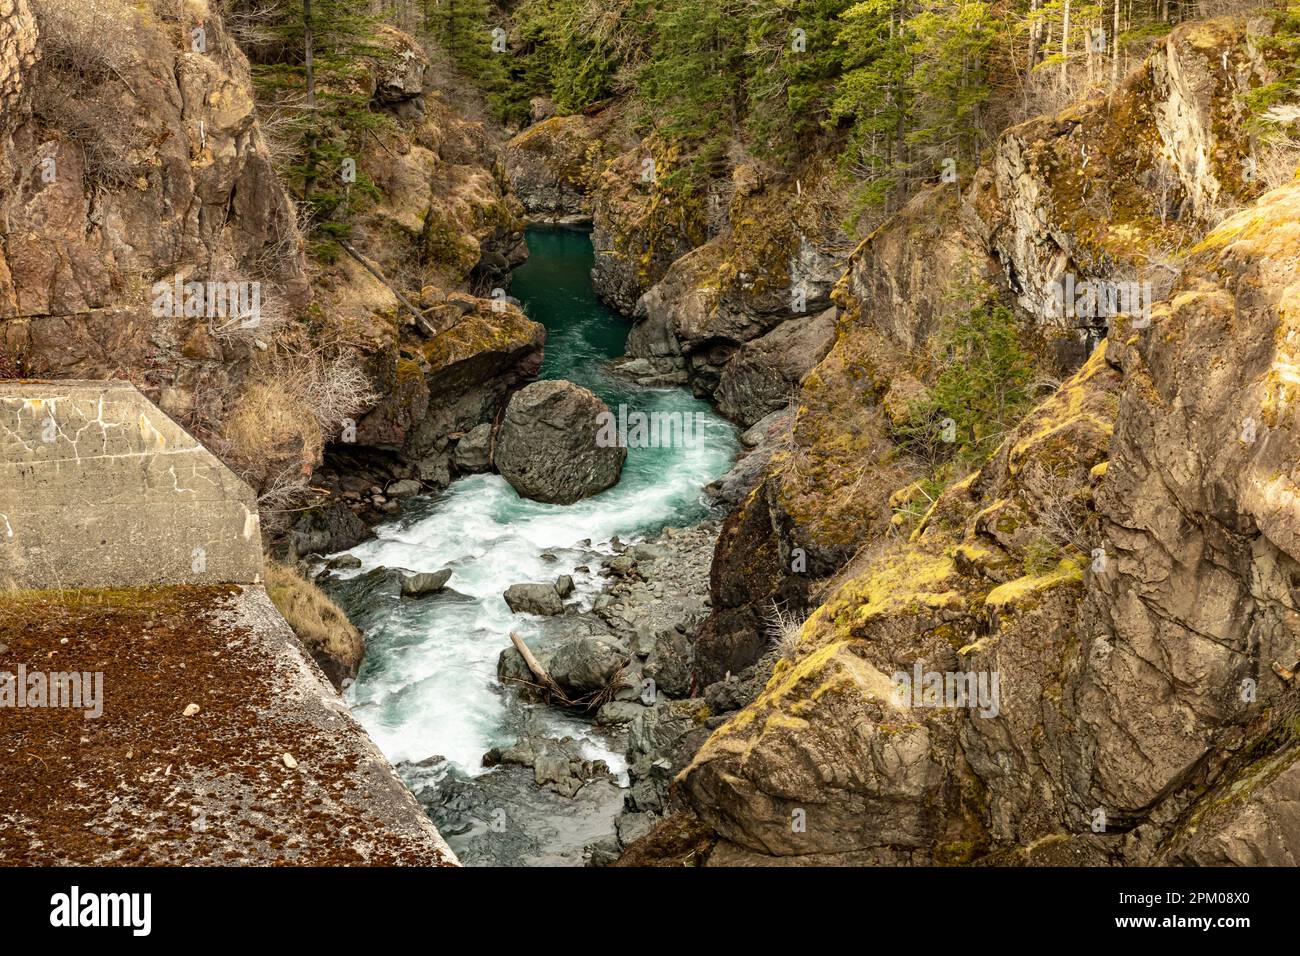 WA23311-00..WASHINGTON - Site of the Glines Canyon Dam, removed from the Elwha River in 2014 in hopes of restoring salmon habit; Olympic National Park Stock Photo